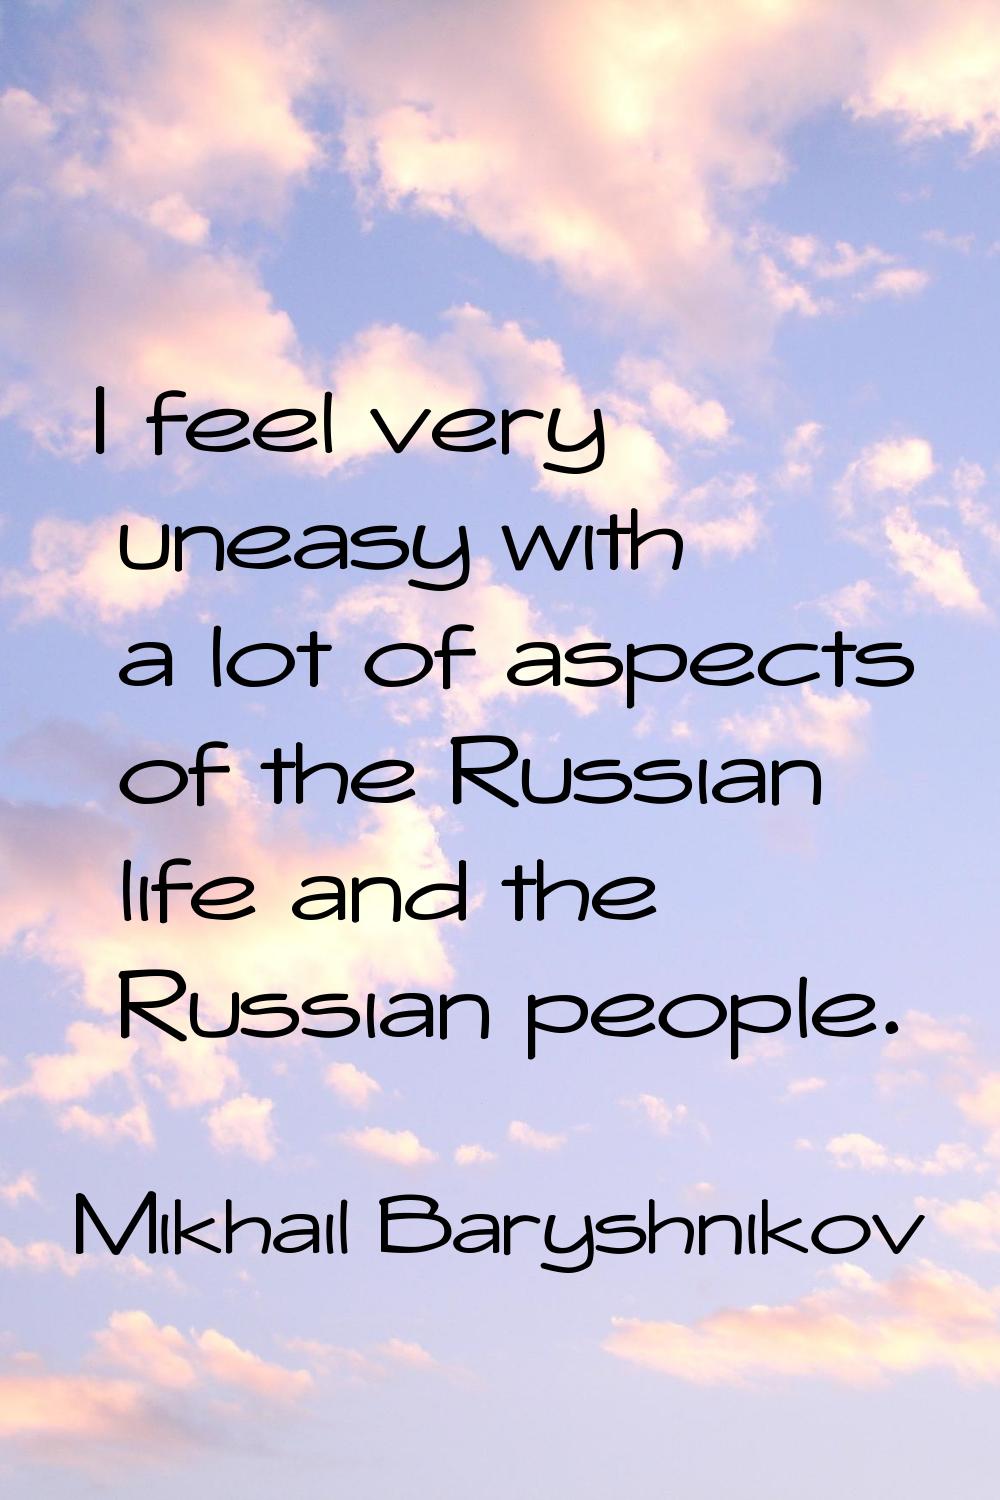 I feel very uneasy with a lot of aspects of the Russian life and the Russian people.